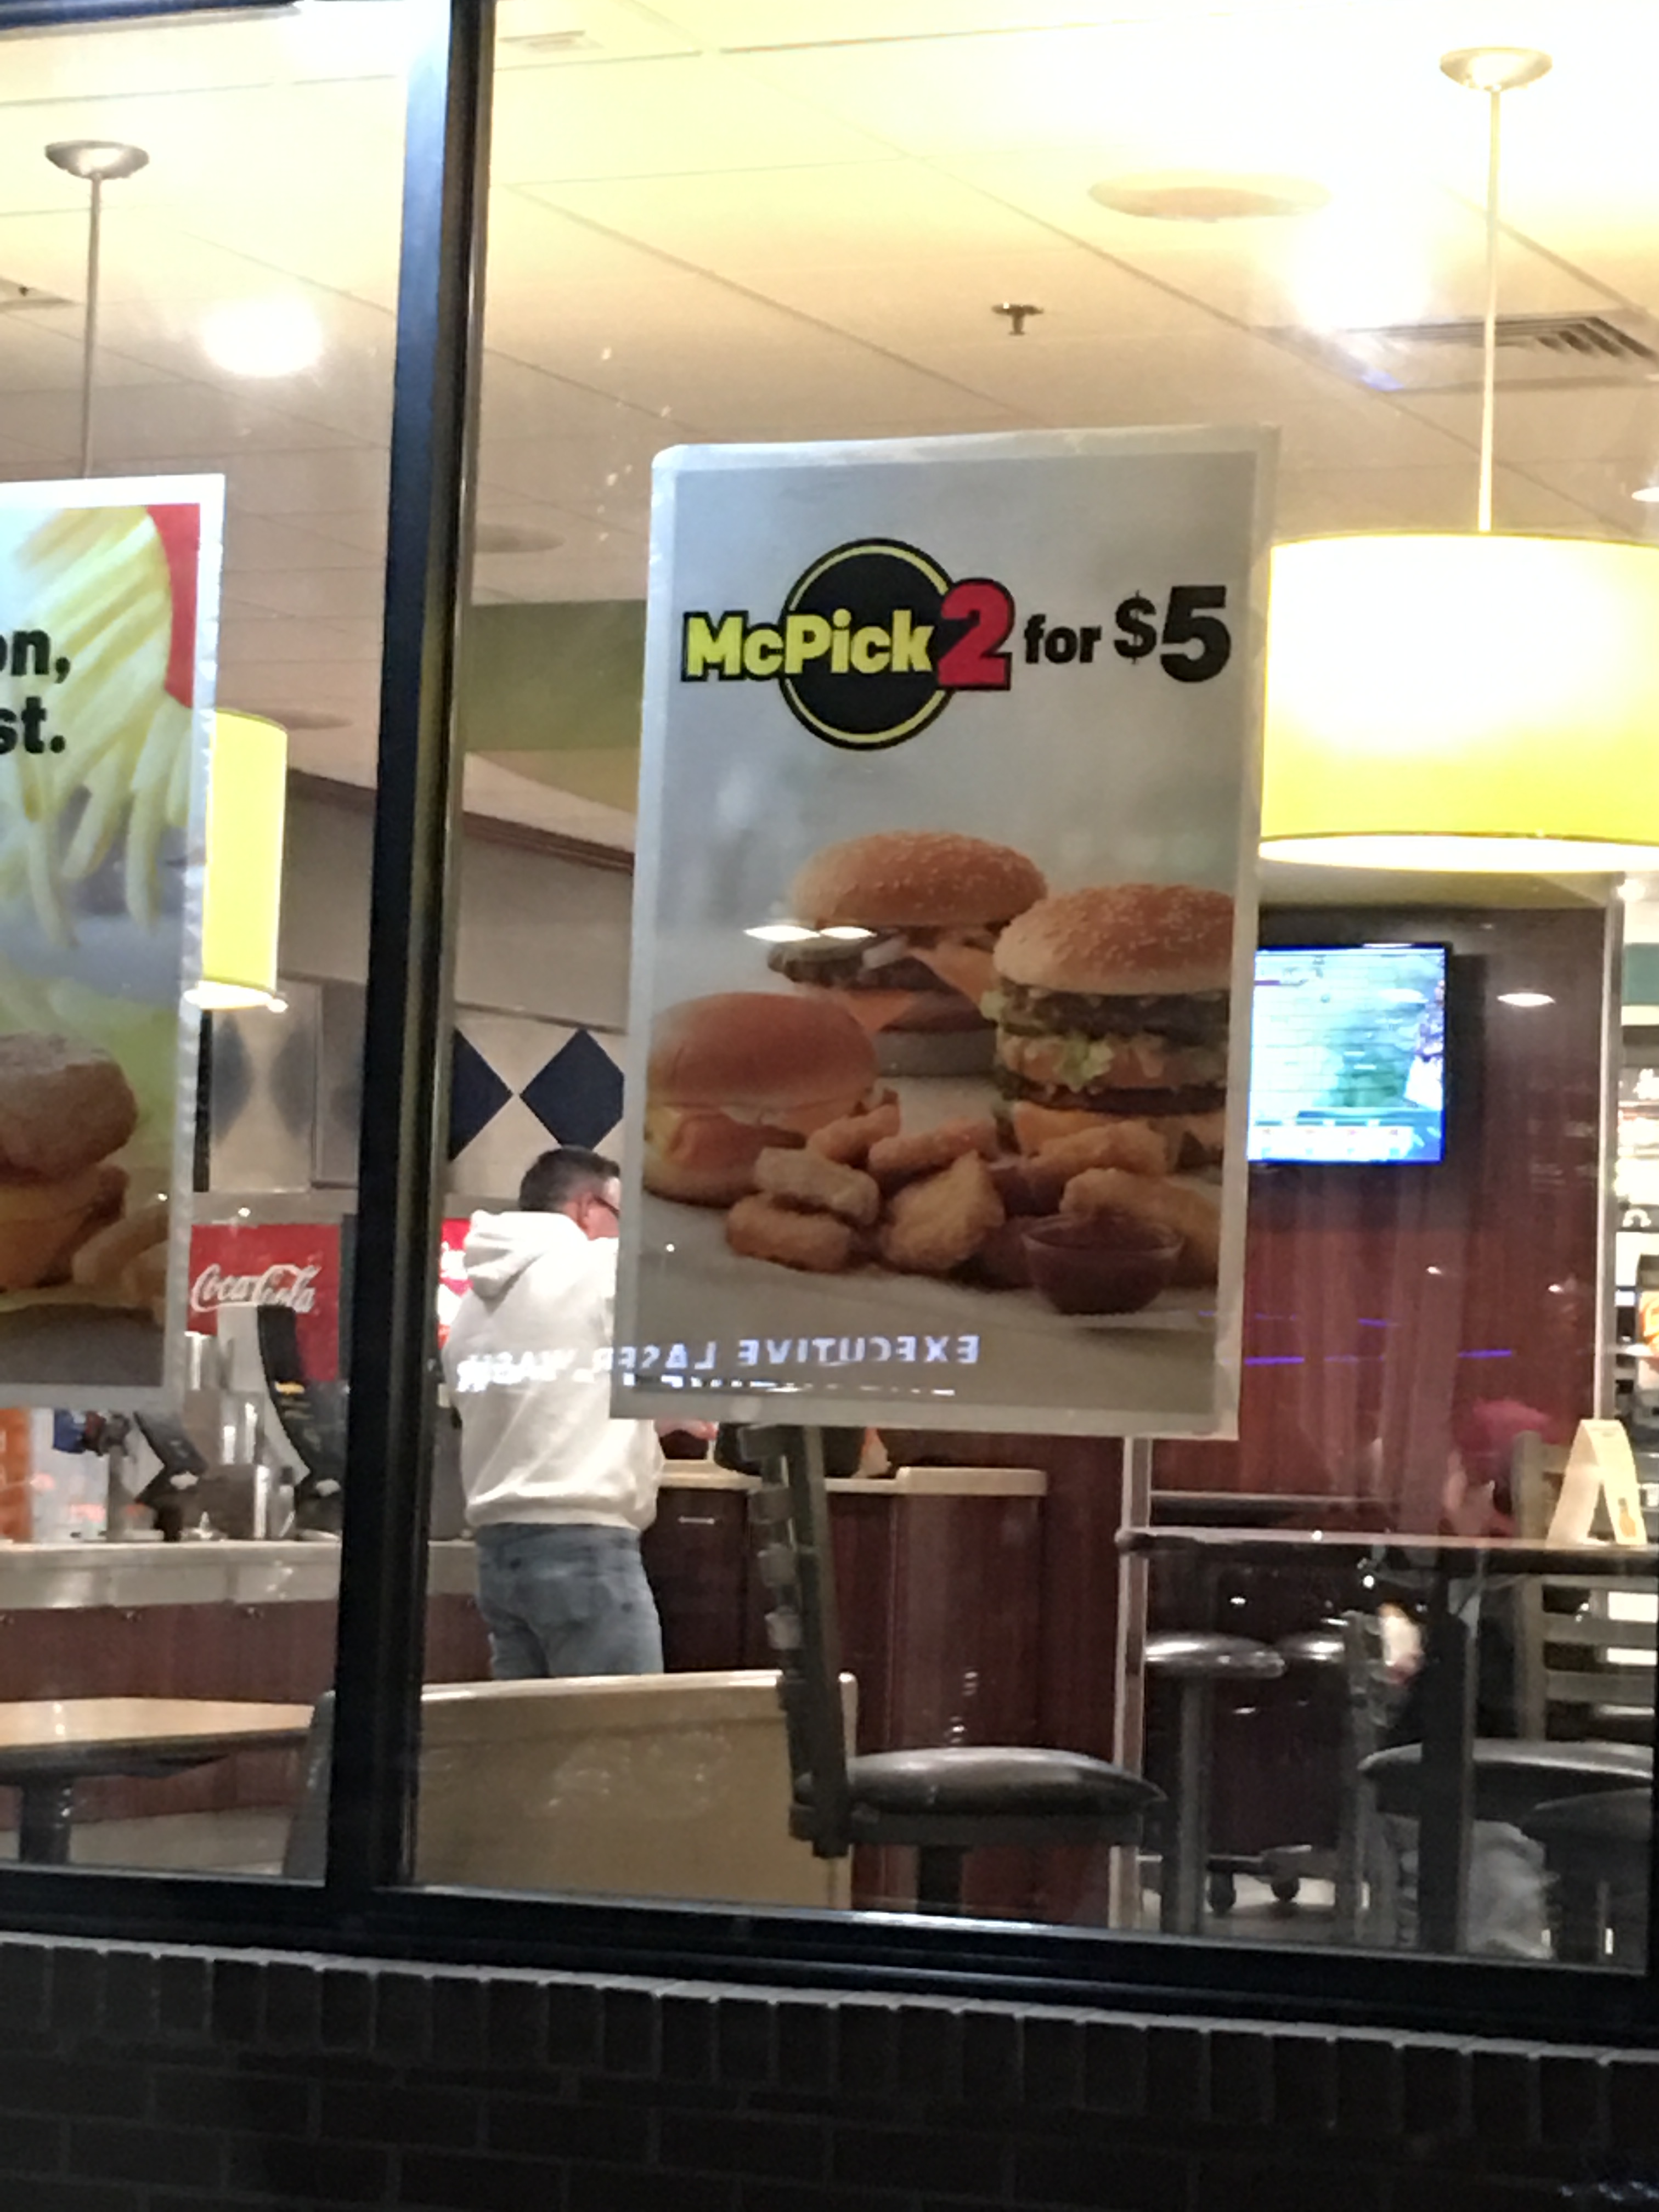 McDonald’s Makes “McPick 2 for $5” Official… For A Limited Time